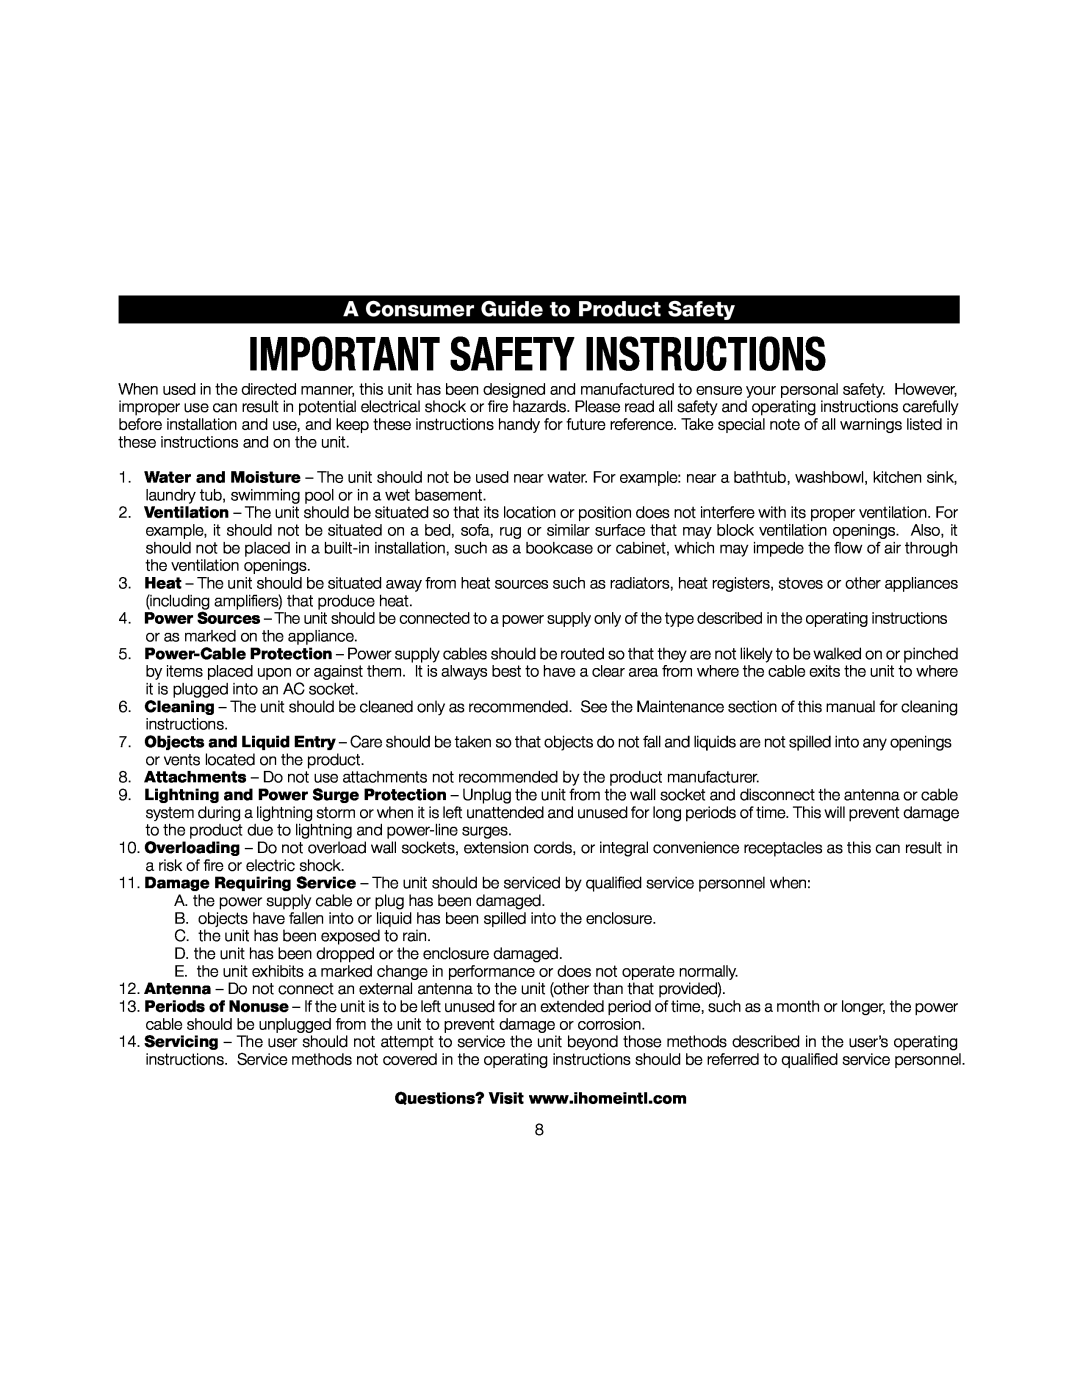 iHome iA17 instruction manual A Consumer Guide to Product Safety 